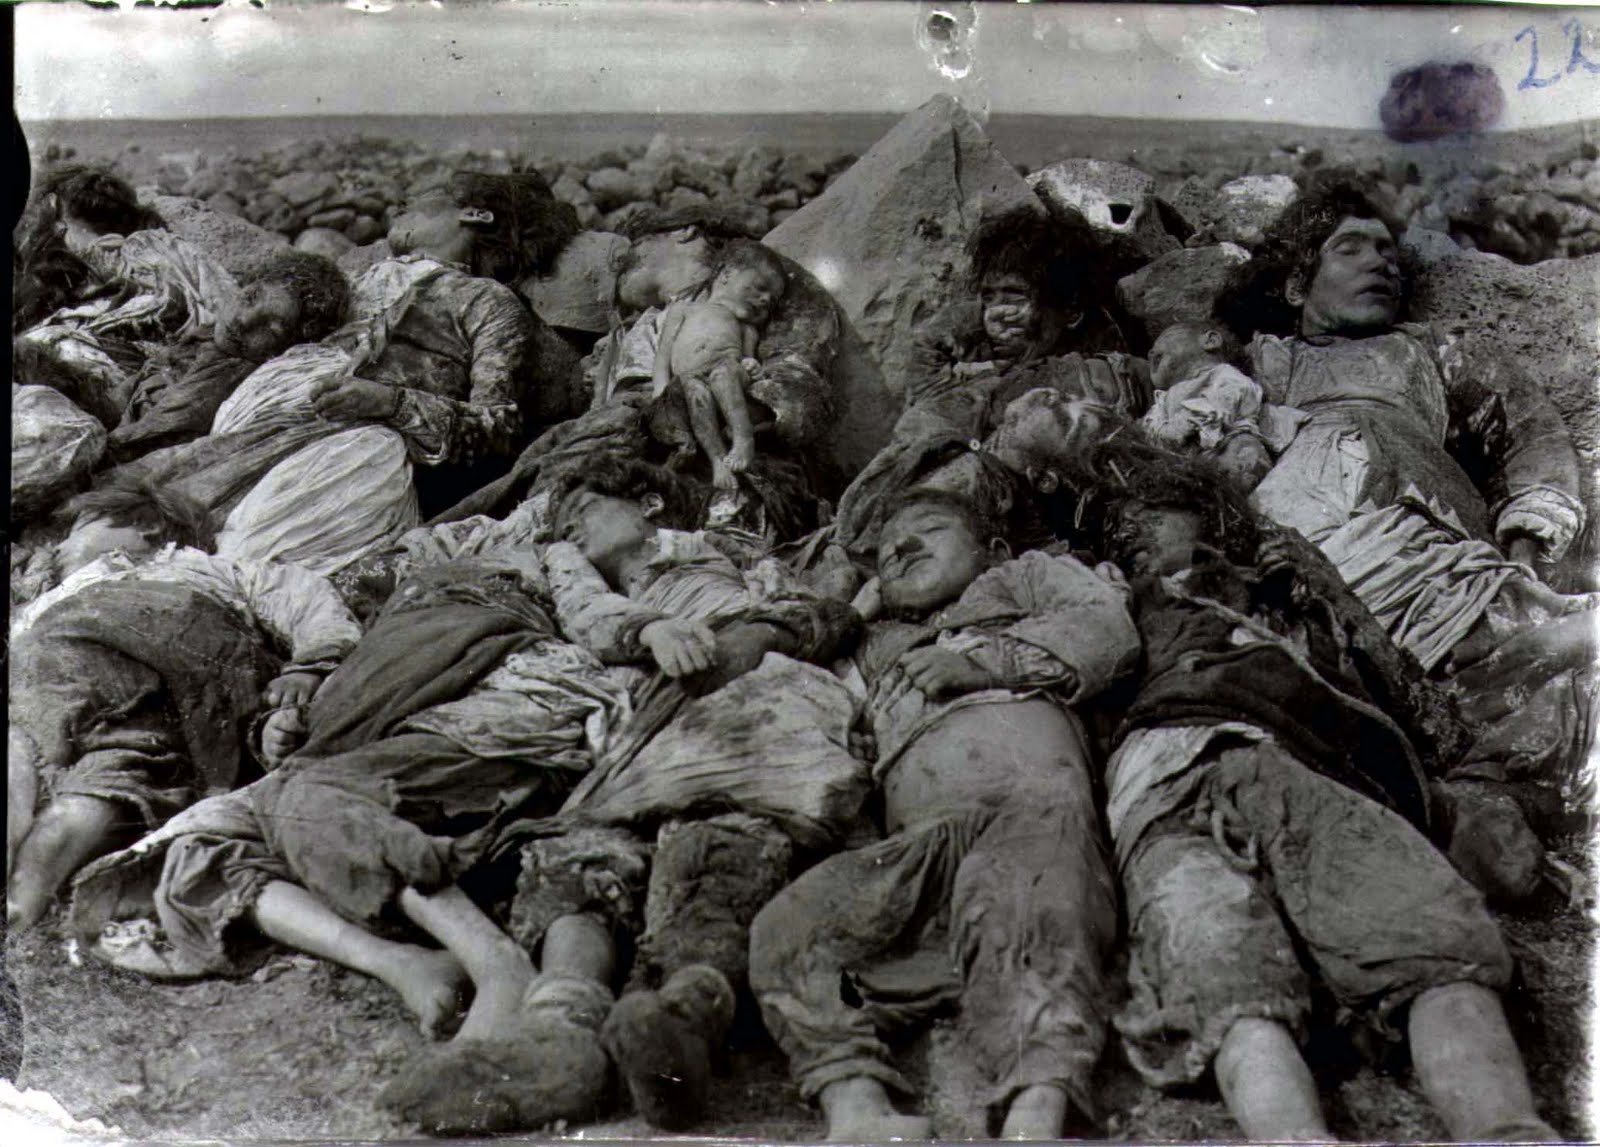 CULTURAL GENOCIDE: Armenian Genocide by turks in 1915